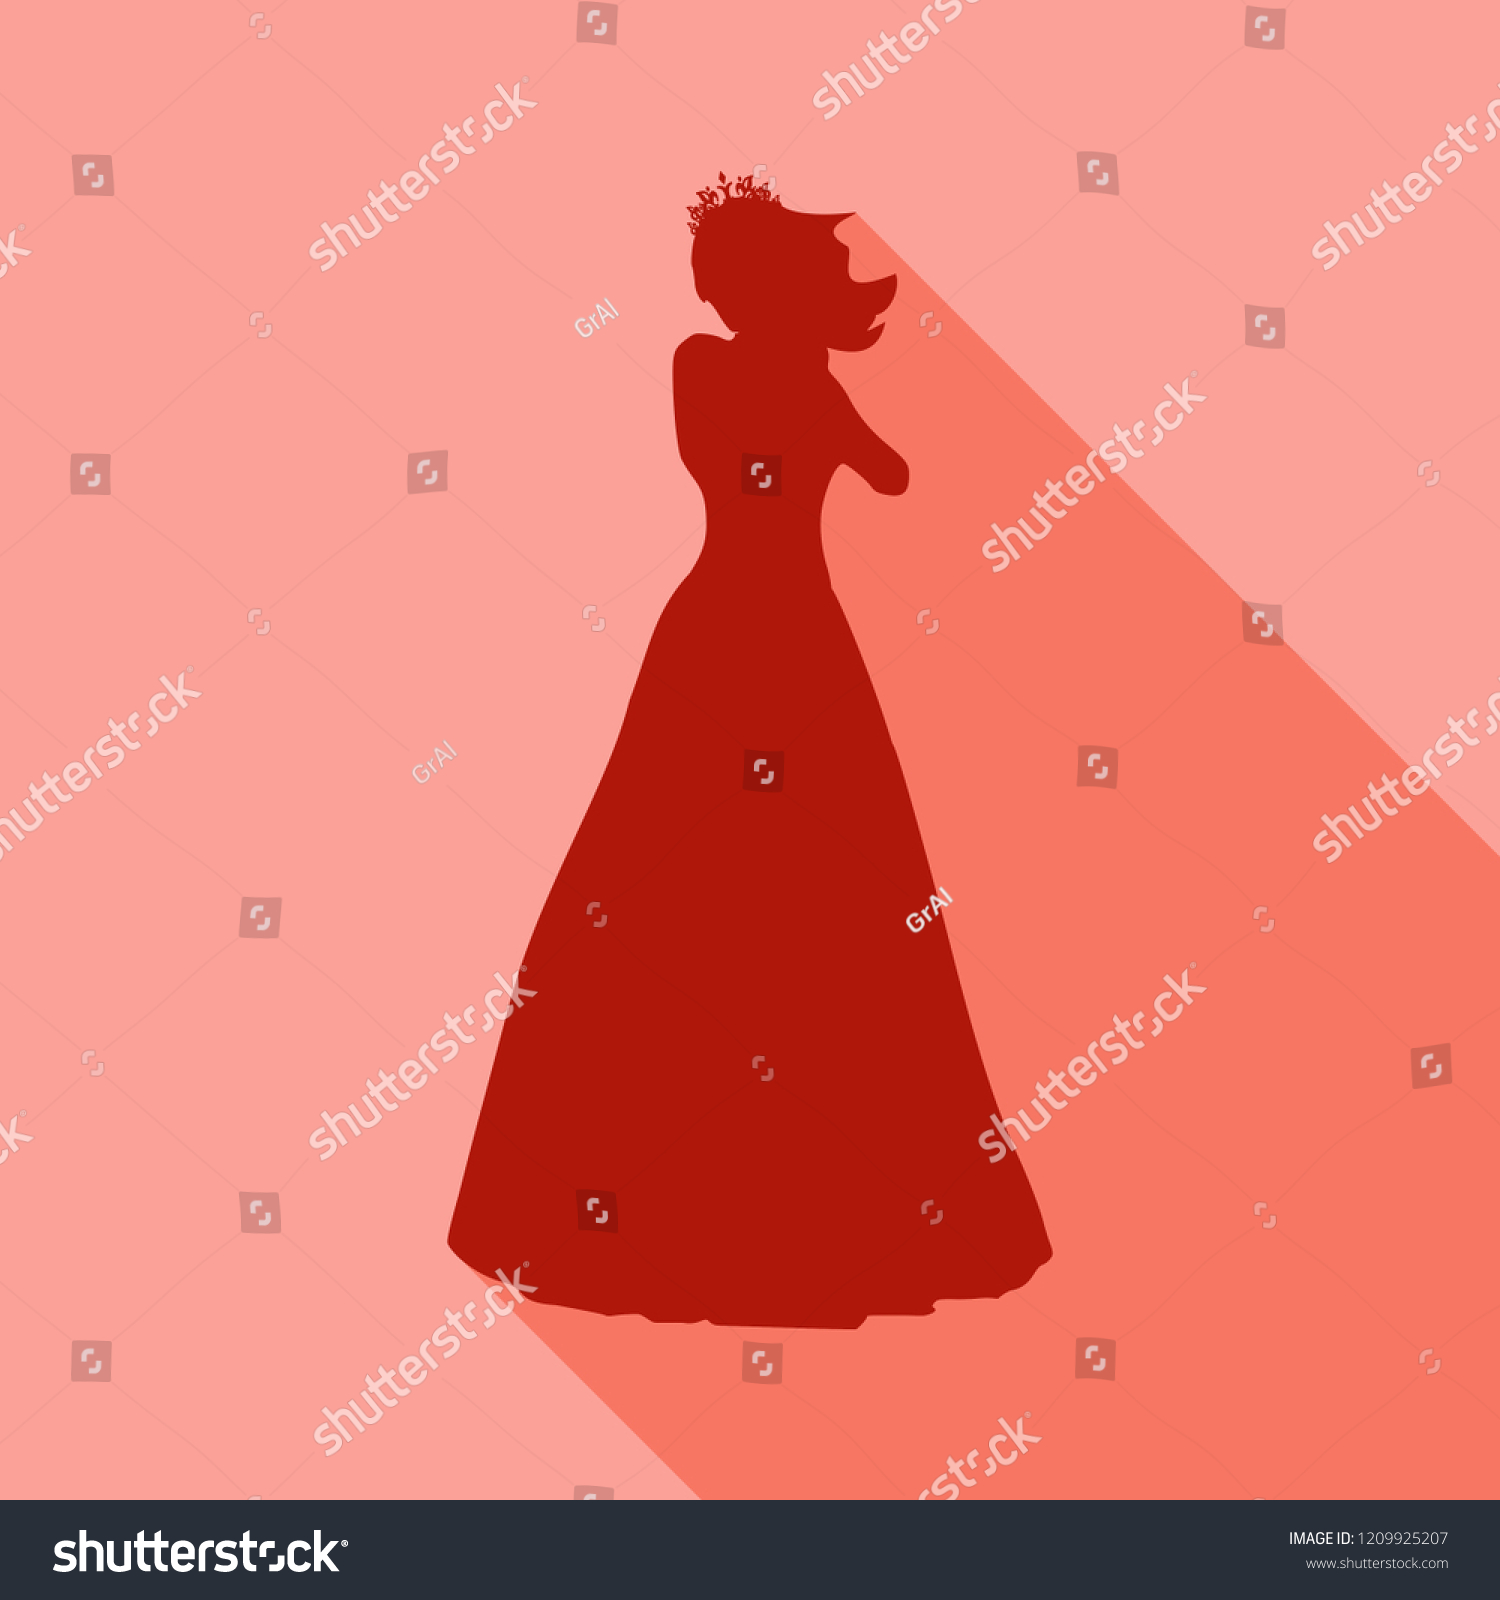 Sexy Woman Silhouette Evening Dress Medieval Stock Vector Royalty Free 1209925207 